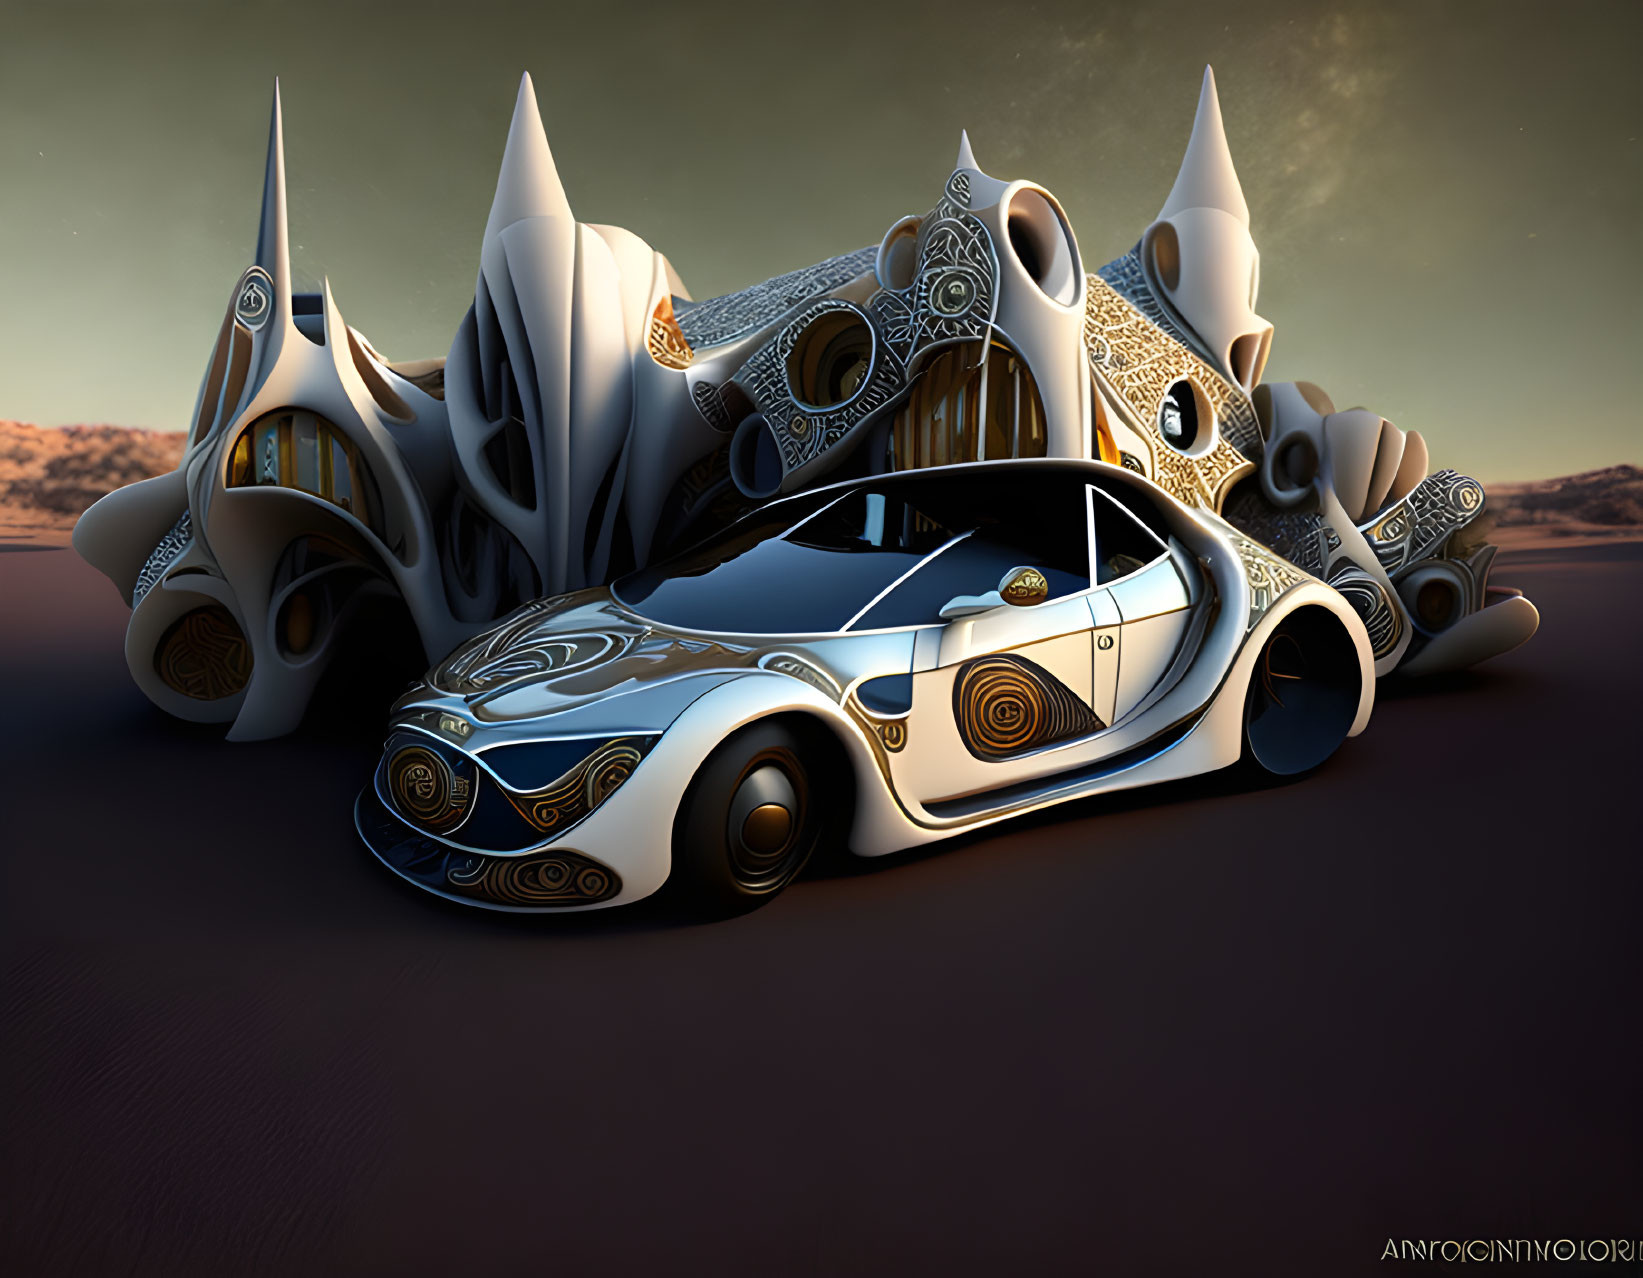 Futuristic white car parked in front of stylized organic buildings